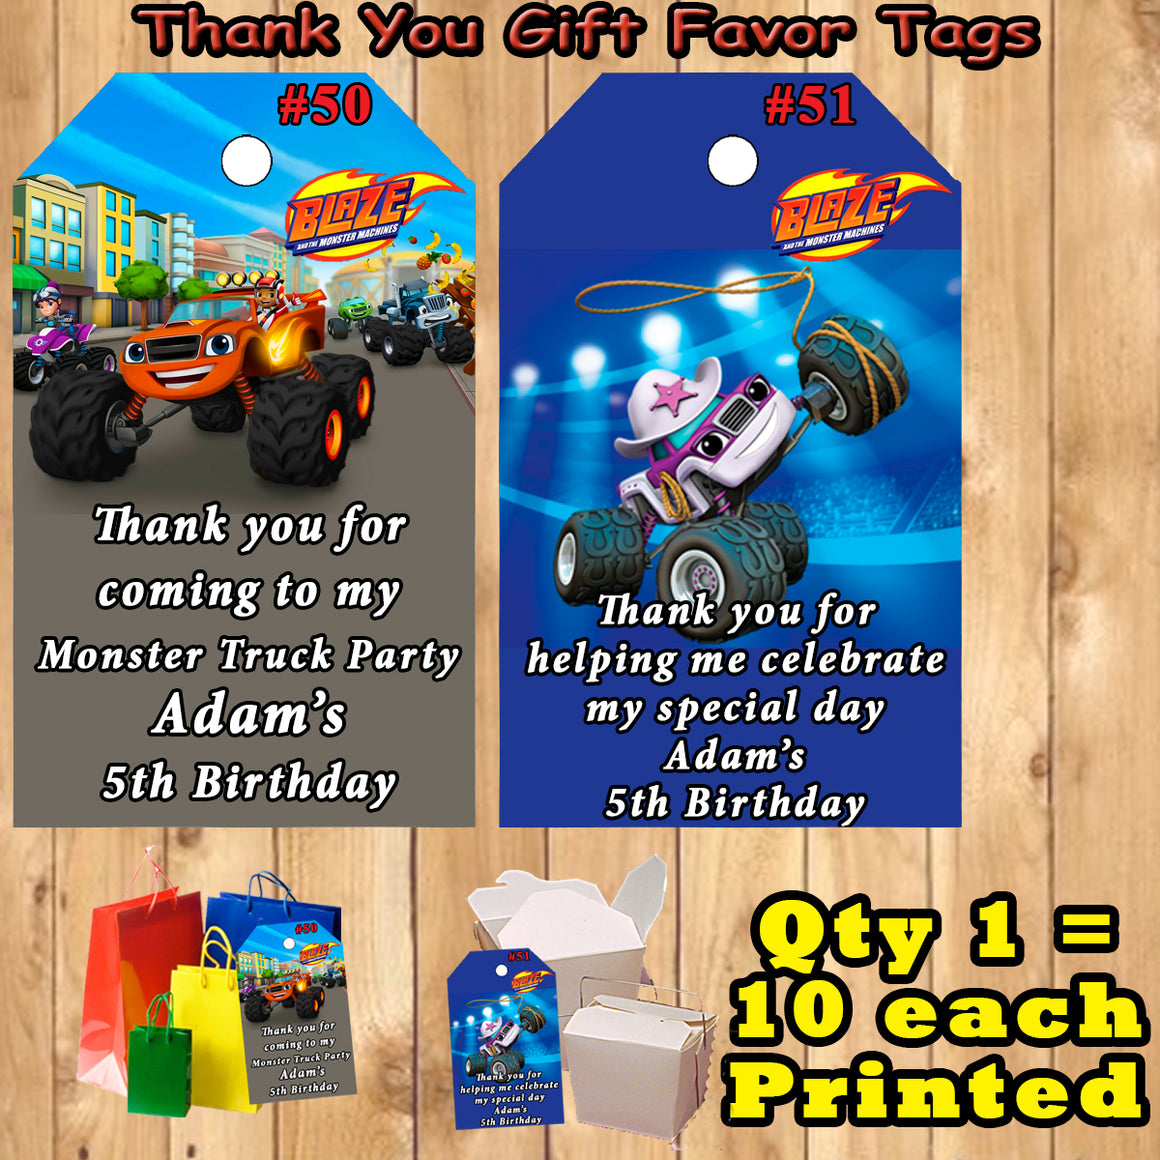 Blaze Monster Machine Truck Birthday Favor Thank You Gift Tags 10 ea P ...